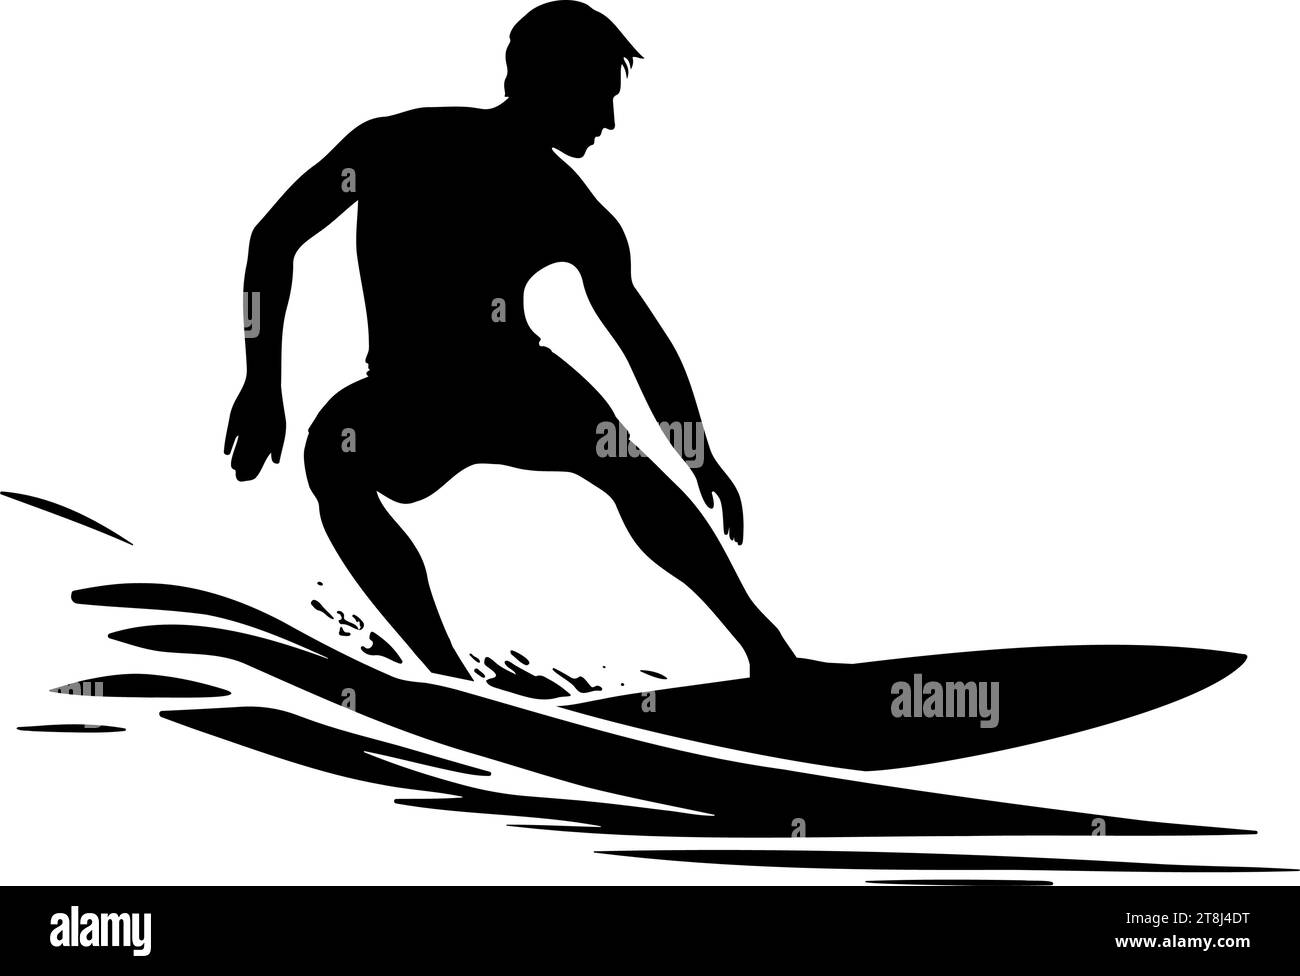 Surfer And Wave silhouette. vector illustration Stock Vector